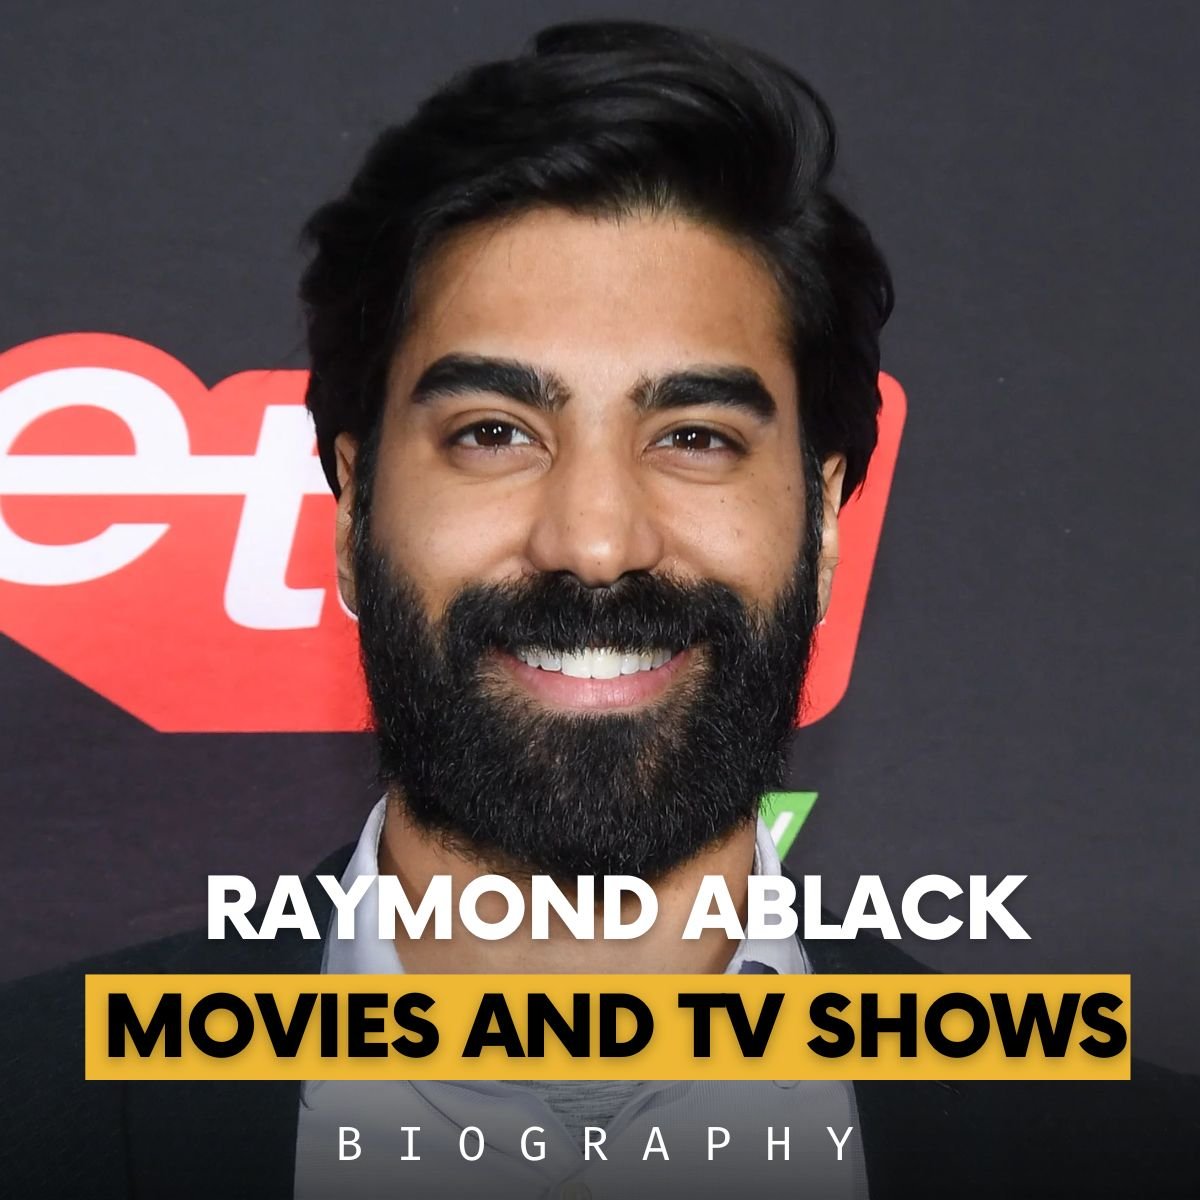 Raymond Ablack Movies and TV shows – All You Need To Know